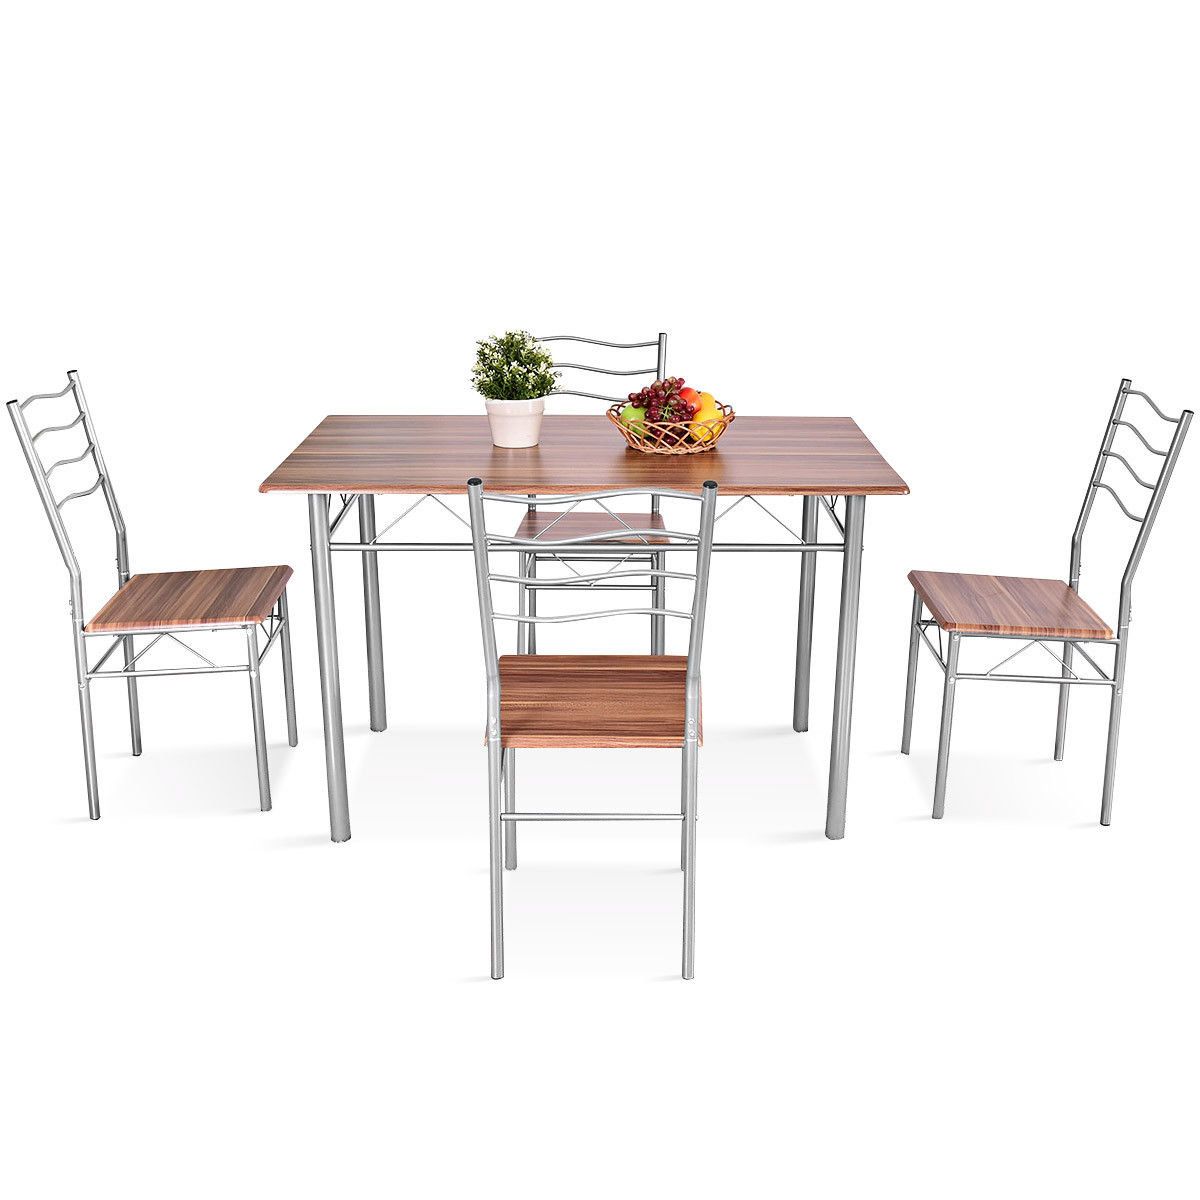 Details About Winston Porter Miskell 5 Piece Dining Set Throughout 2018 Miskell 5 Piece Dining Sets (Photo 3 of 20)